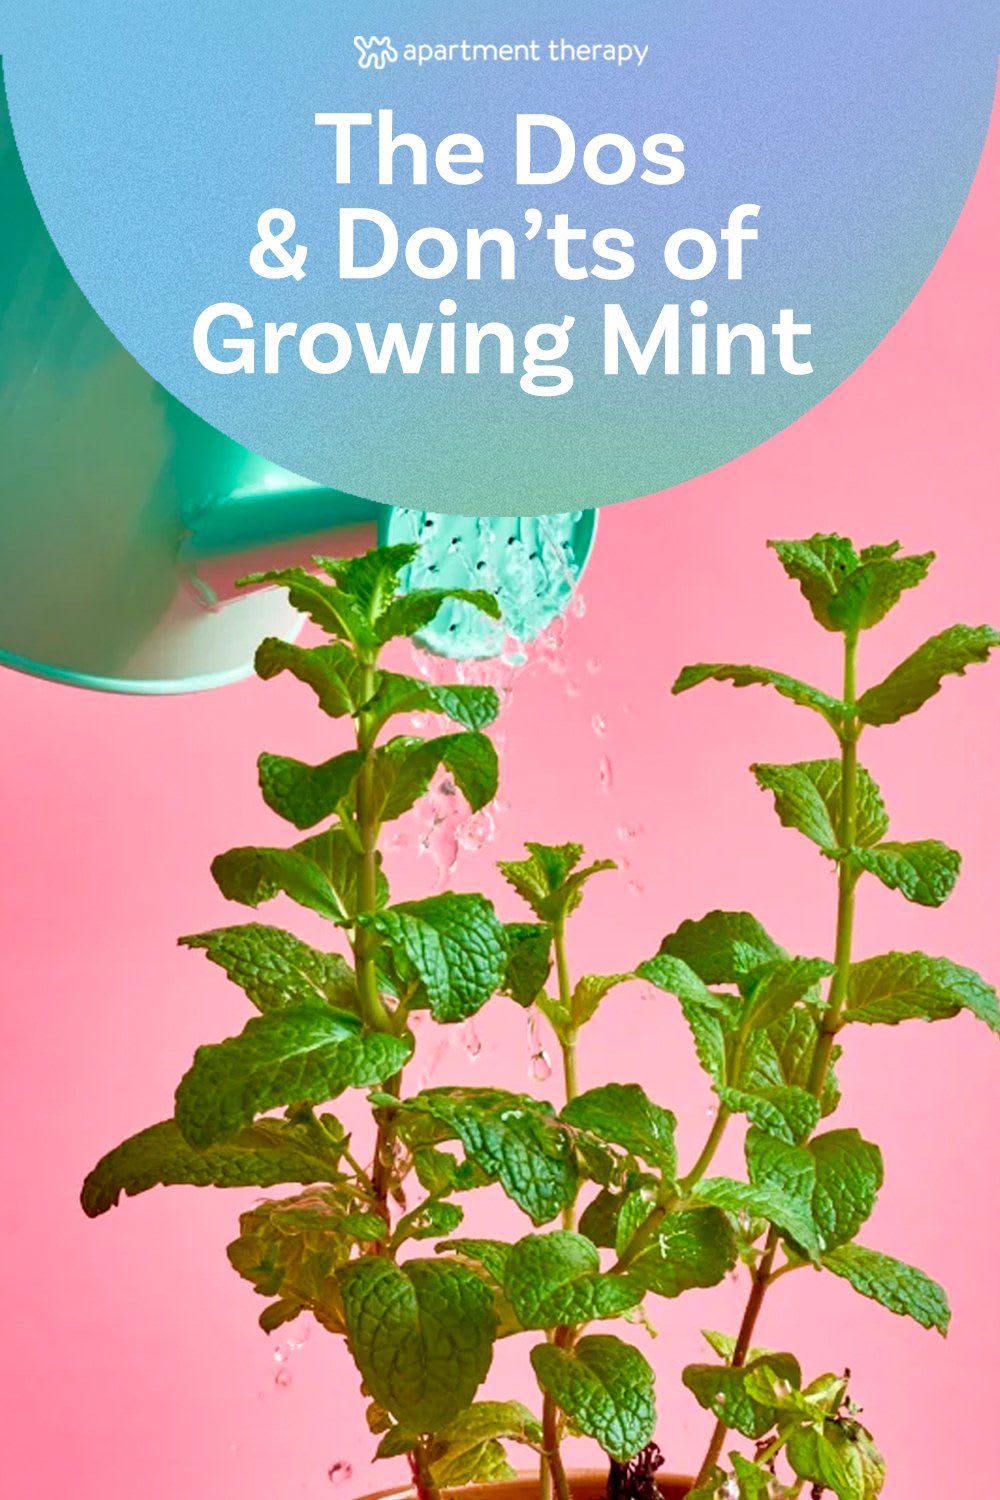 The Dos & Don’ts of Growing Mint